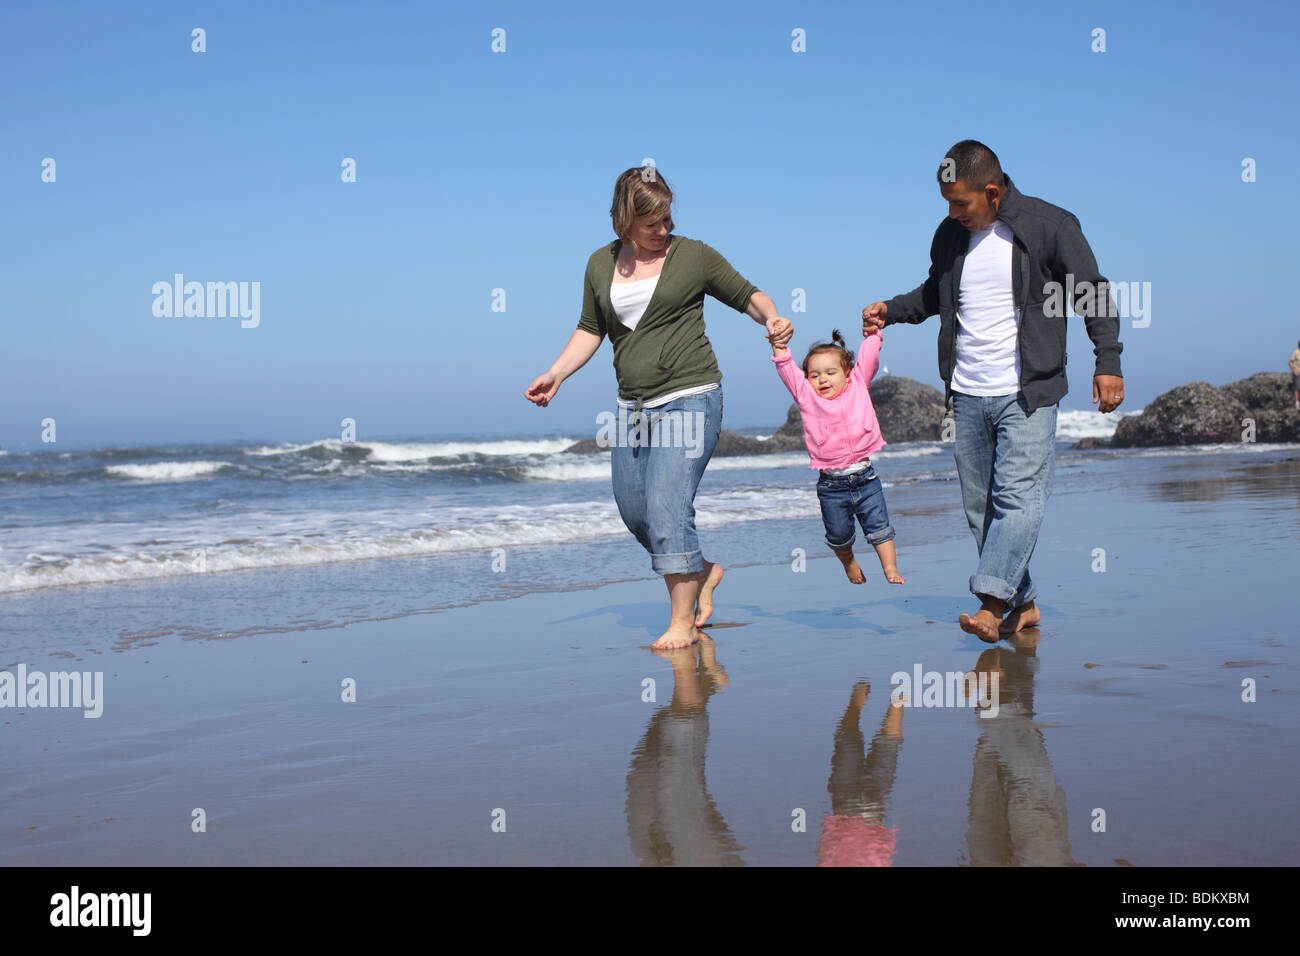 Mother and father swinging young girl at beach Stock Photo